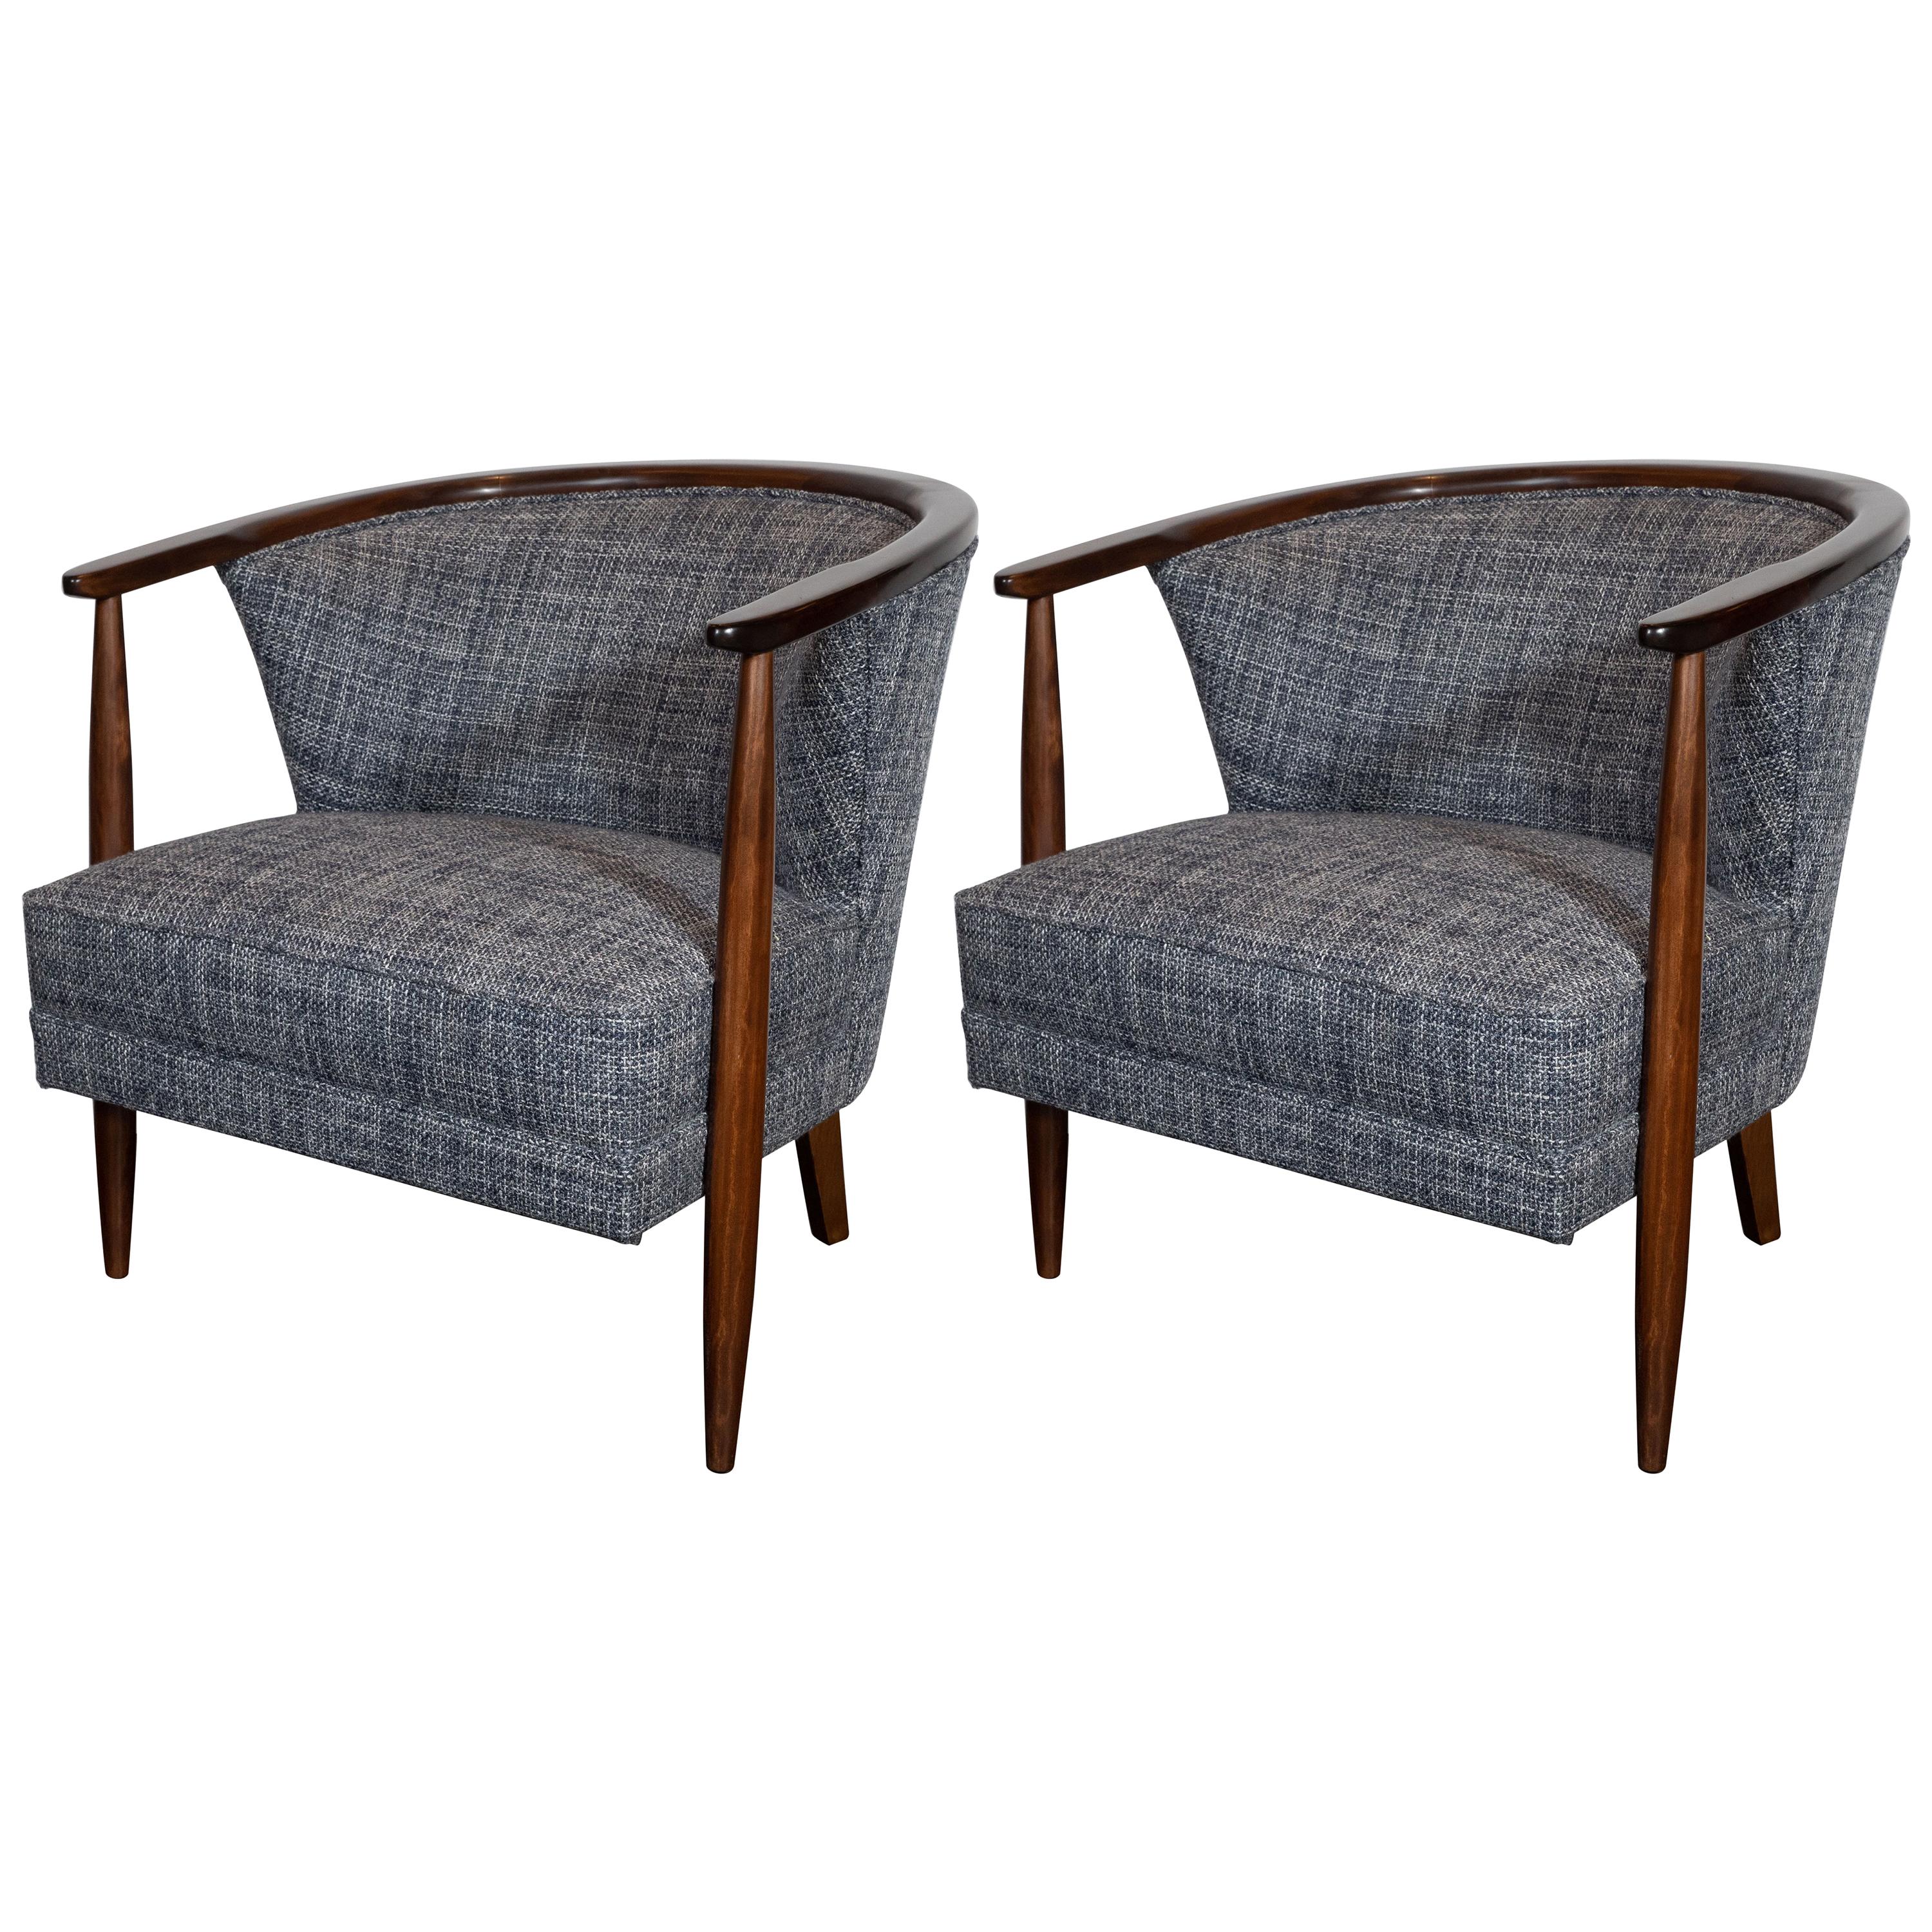 Midcentury Barrel Back Chairs in Handrubbed Walnut with Rectilinear Upholstery